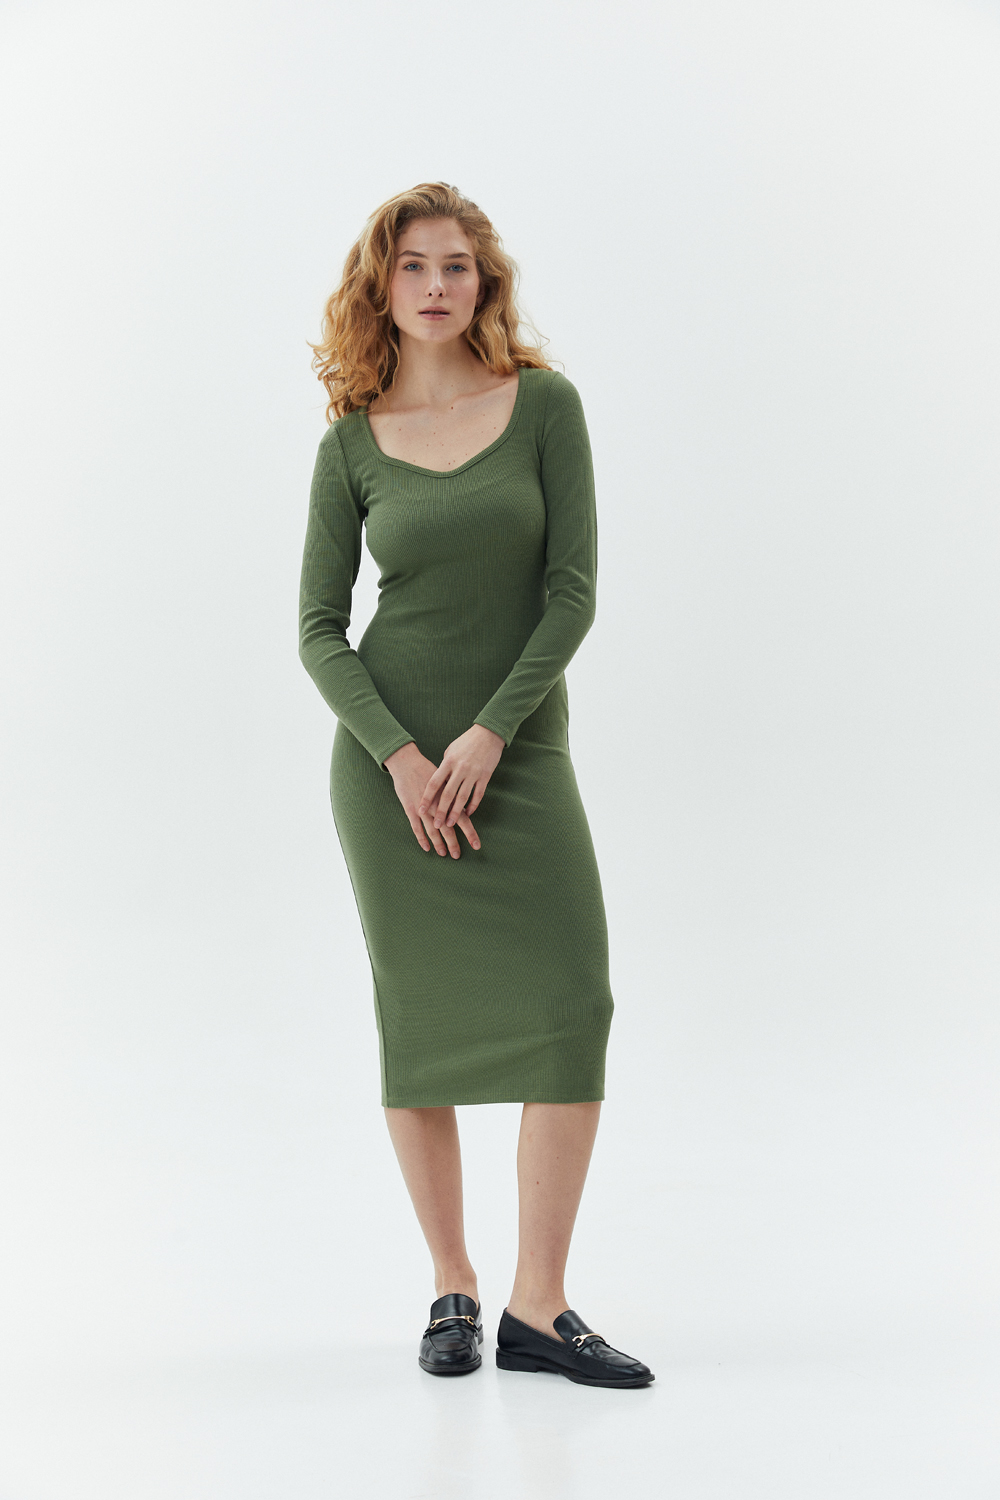 Fitted dress with long sleeves in olive color